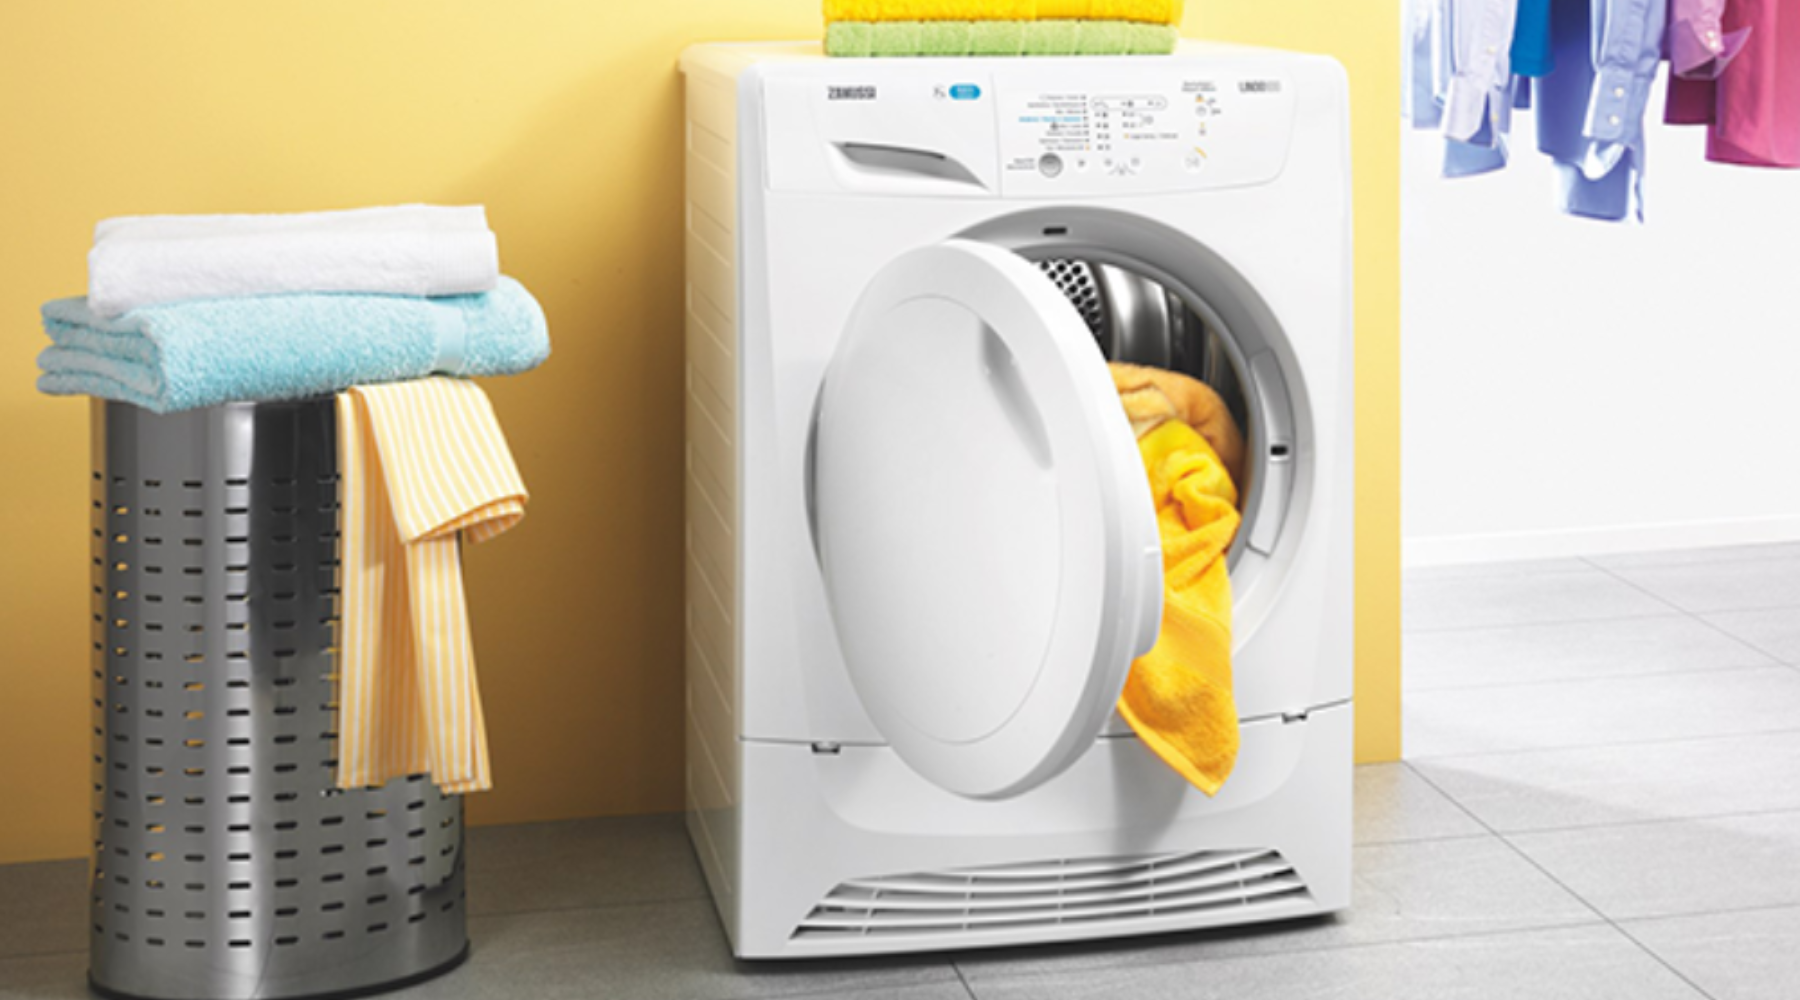 Your Tumble Dryer Explained: Settings, Suitability, And Saving Money